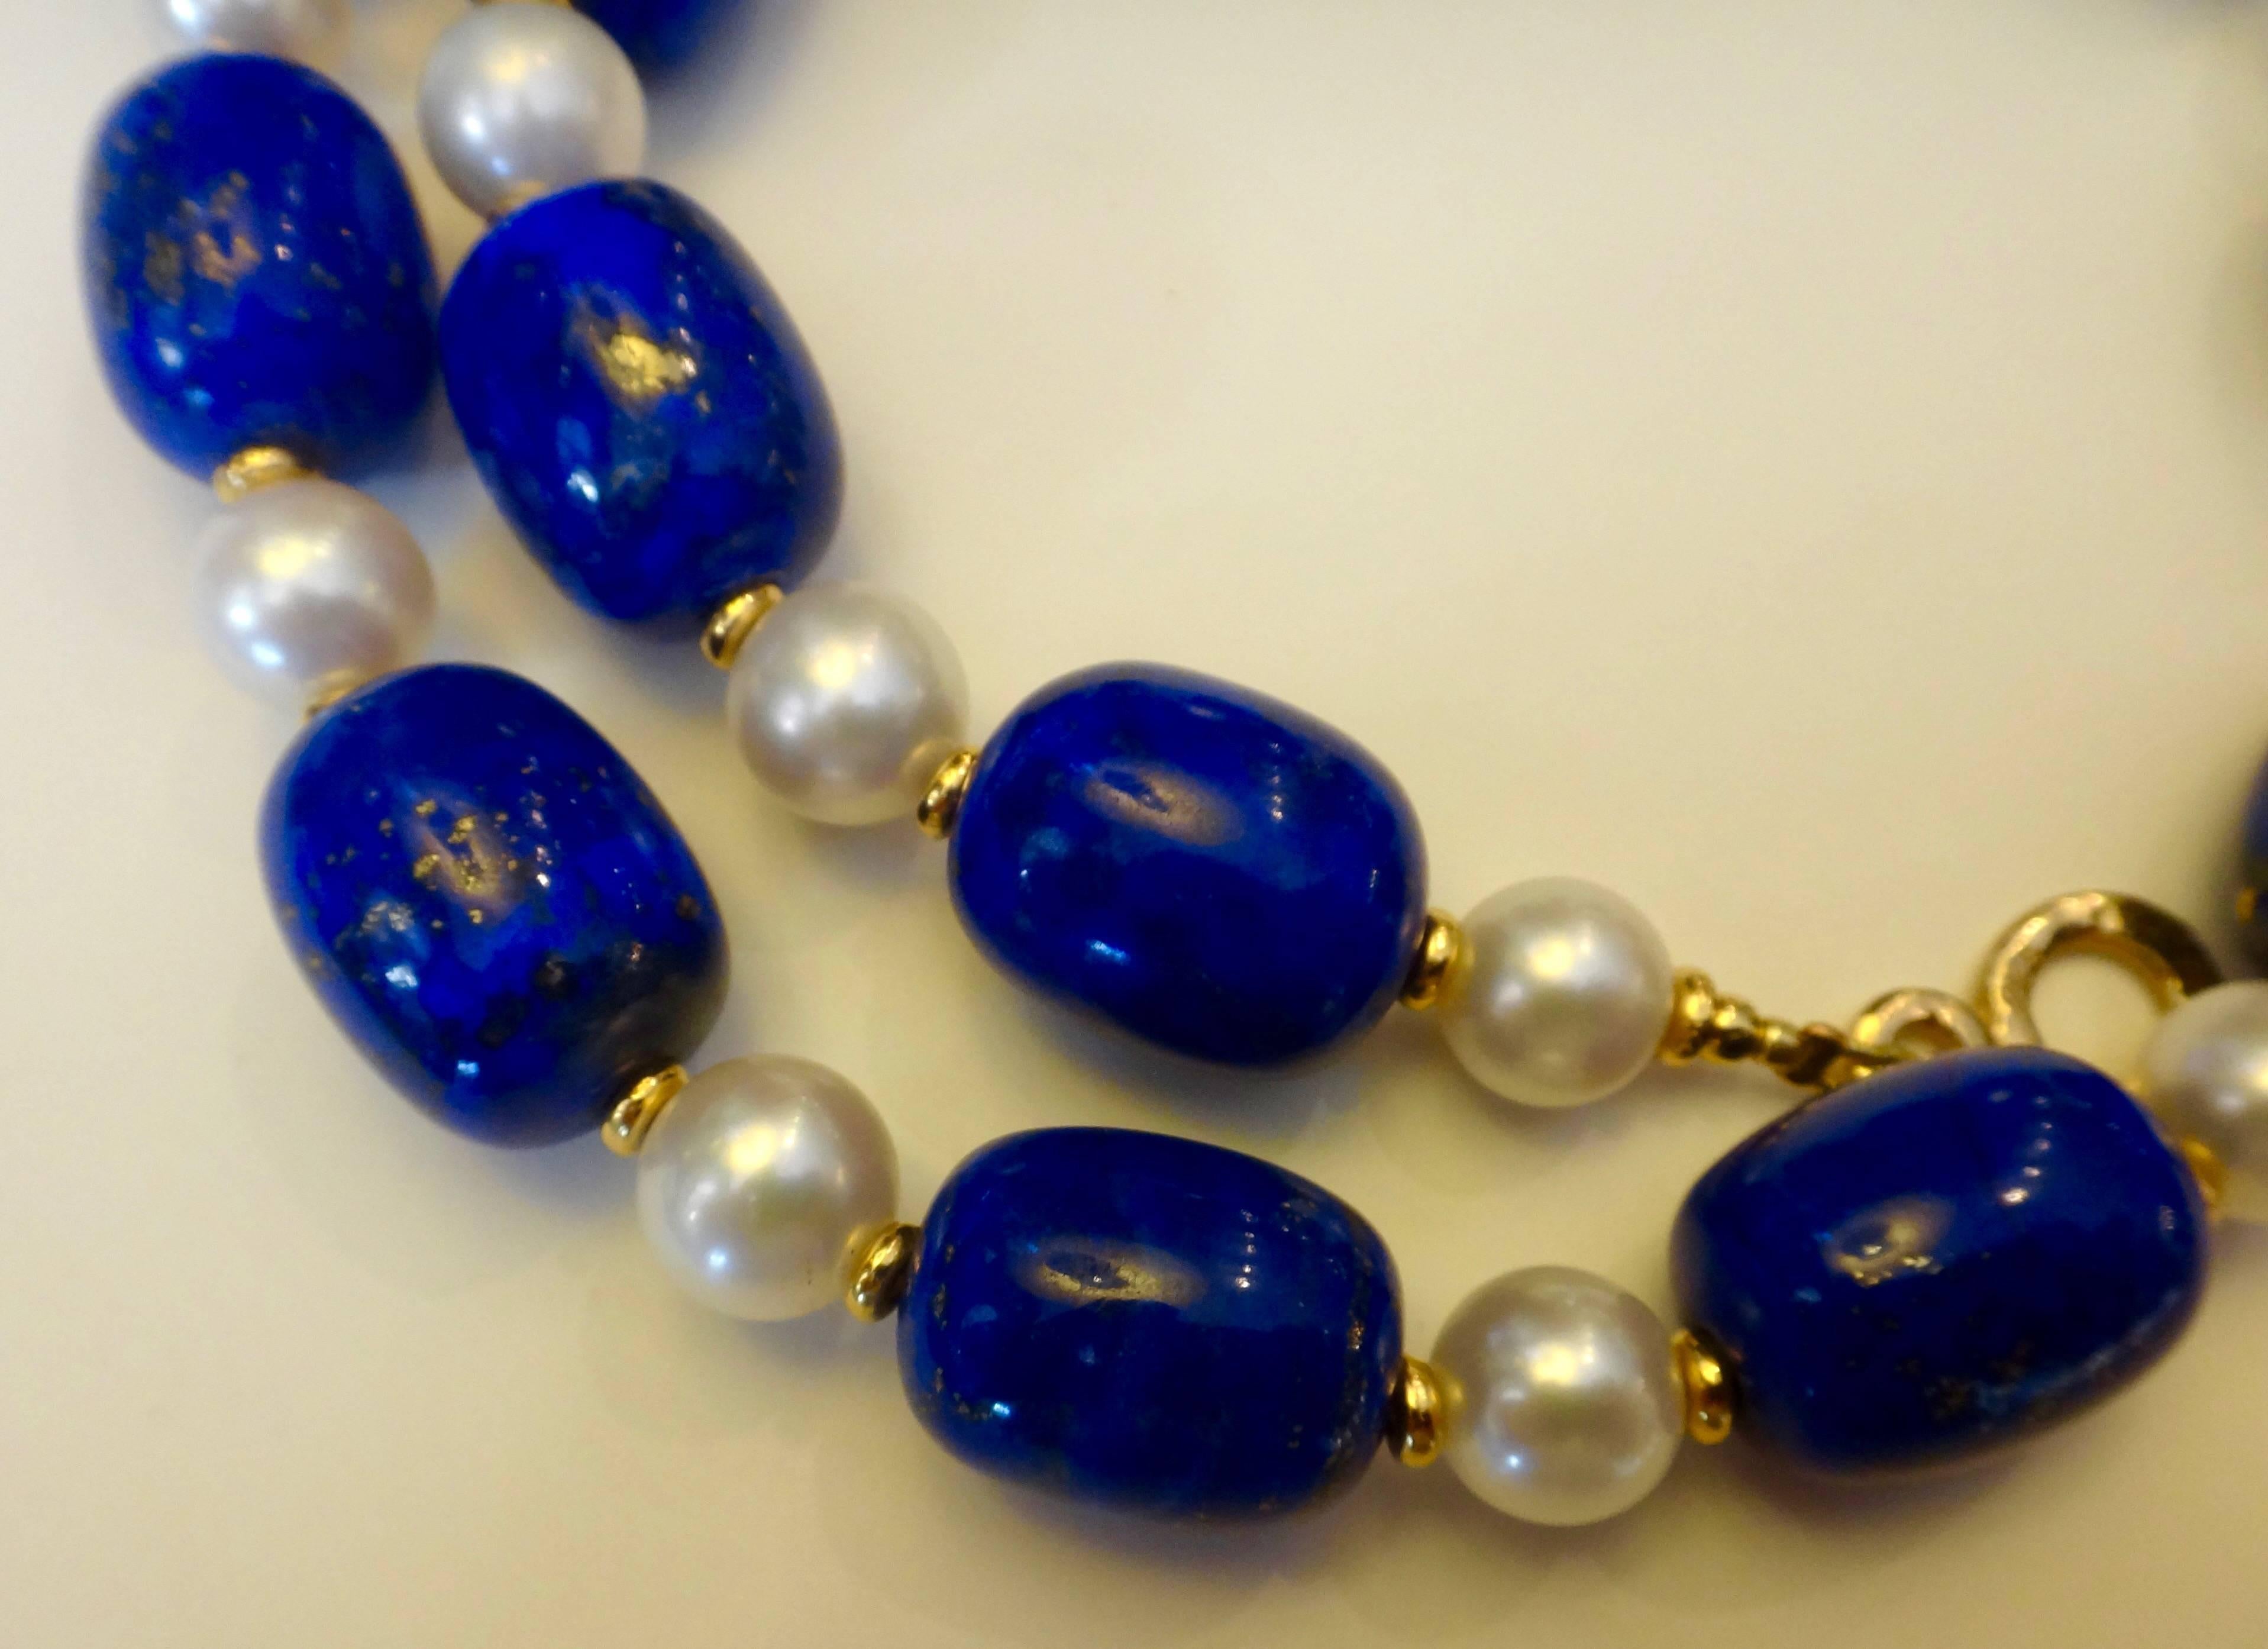 Lapis lazuli rough from Afghanistan has been shaped and polished into barrel shaped beads and are classically combined with gem quality white cultured pearls in this necklace.  The lapis is a highly polished royal blue and sprinkled with pyrite, so